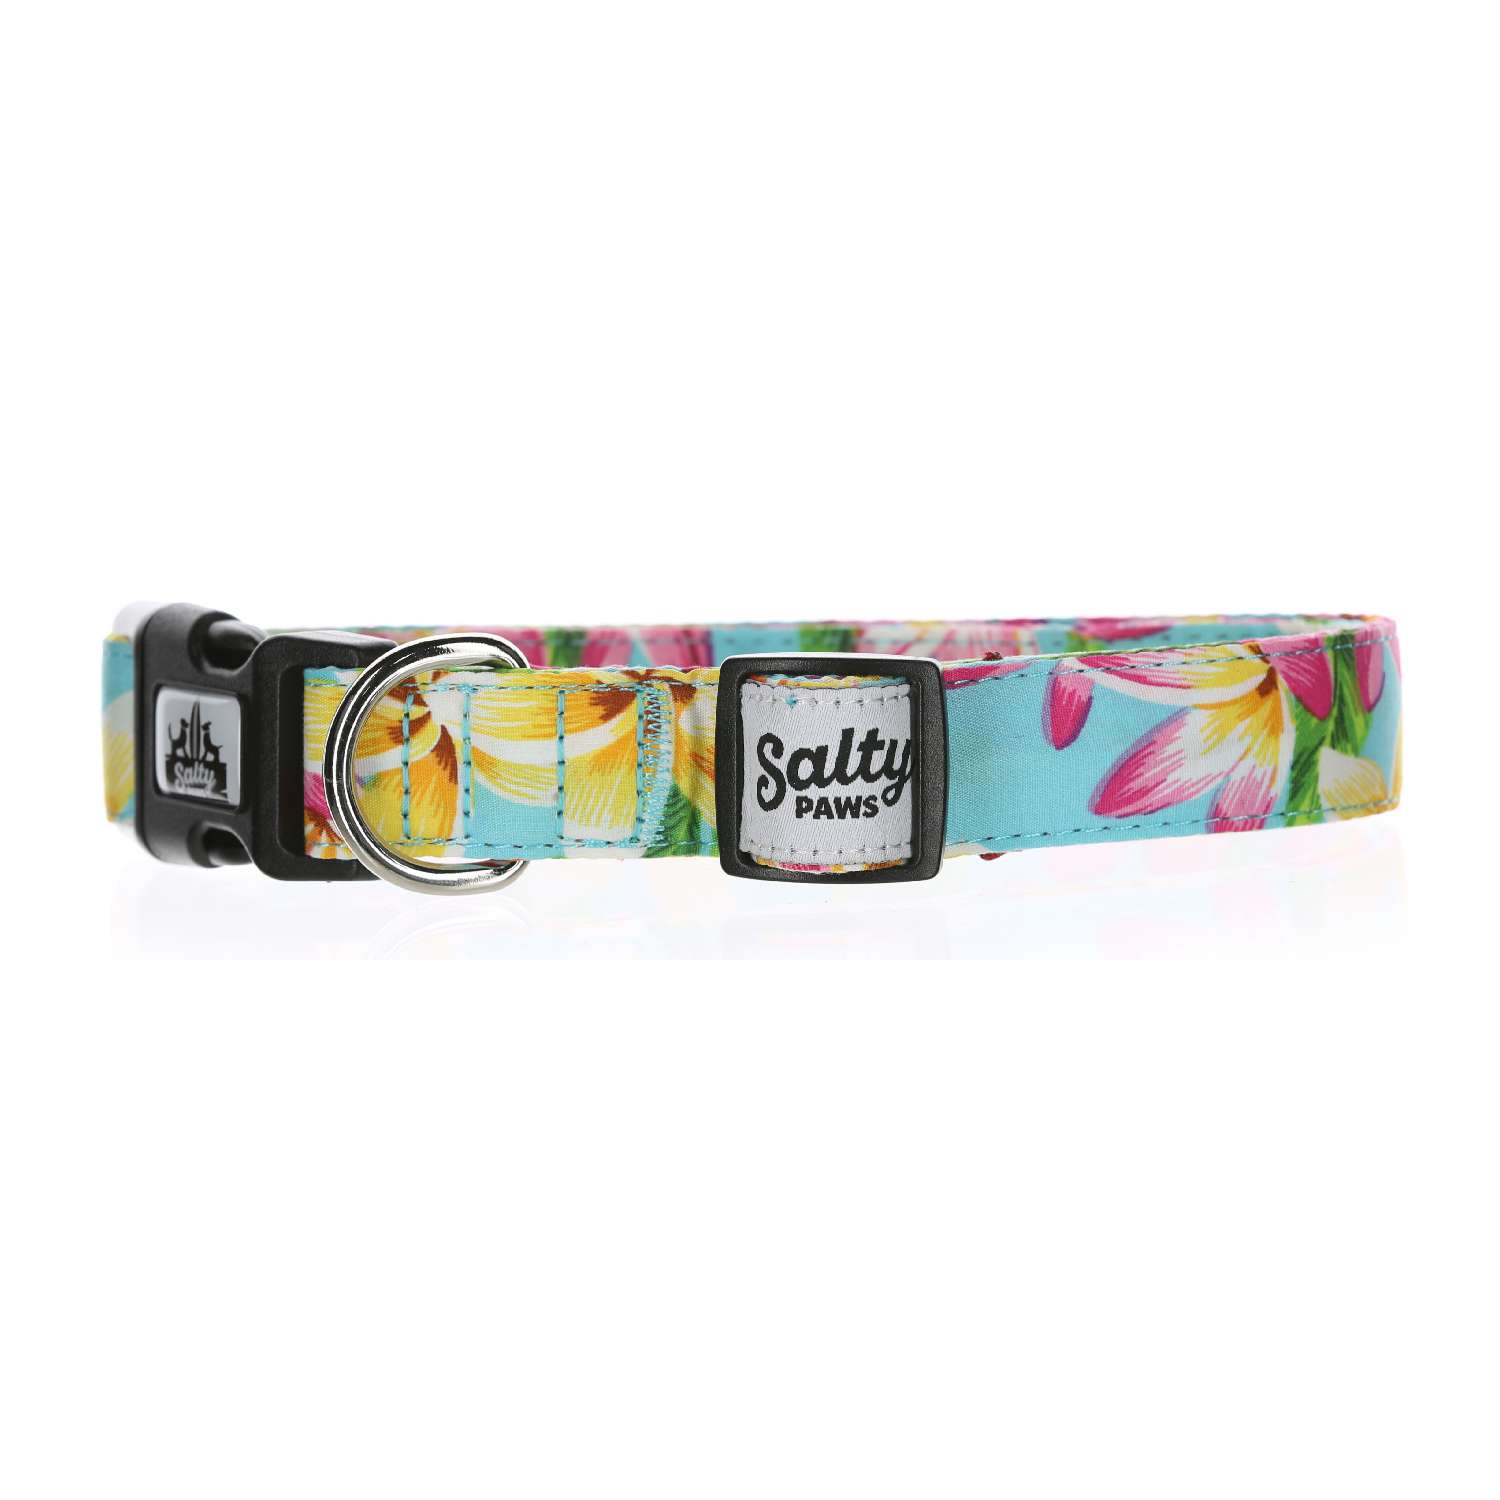 Salty Paws Surfing Dog Collar | Designs for Beach Dogs,  Floral, Fishing, Surfing, Hawaiian,  Light Blue Floral L